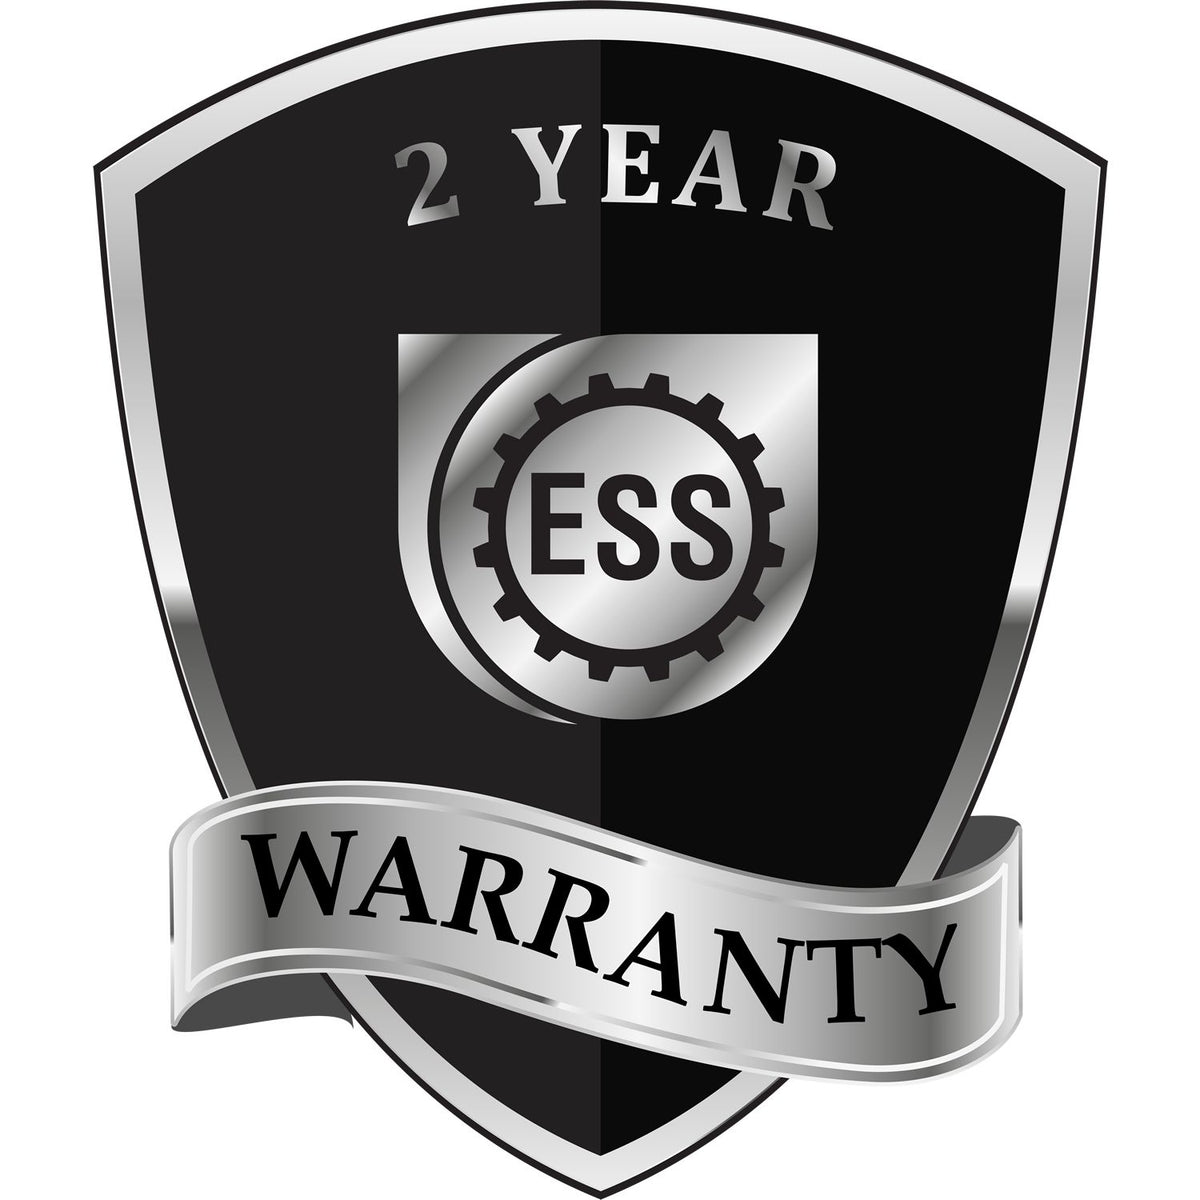 A badge or emblem showing a warranty icon for the State of Kansas Long Reach Architectural Embossing Seal